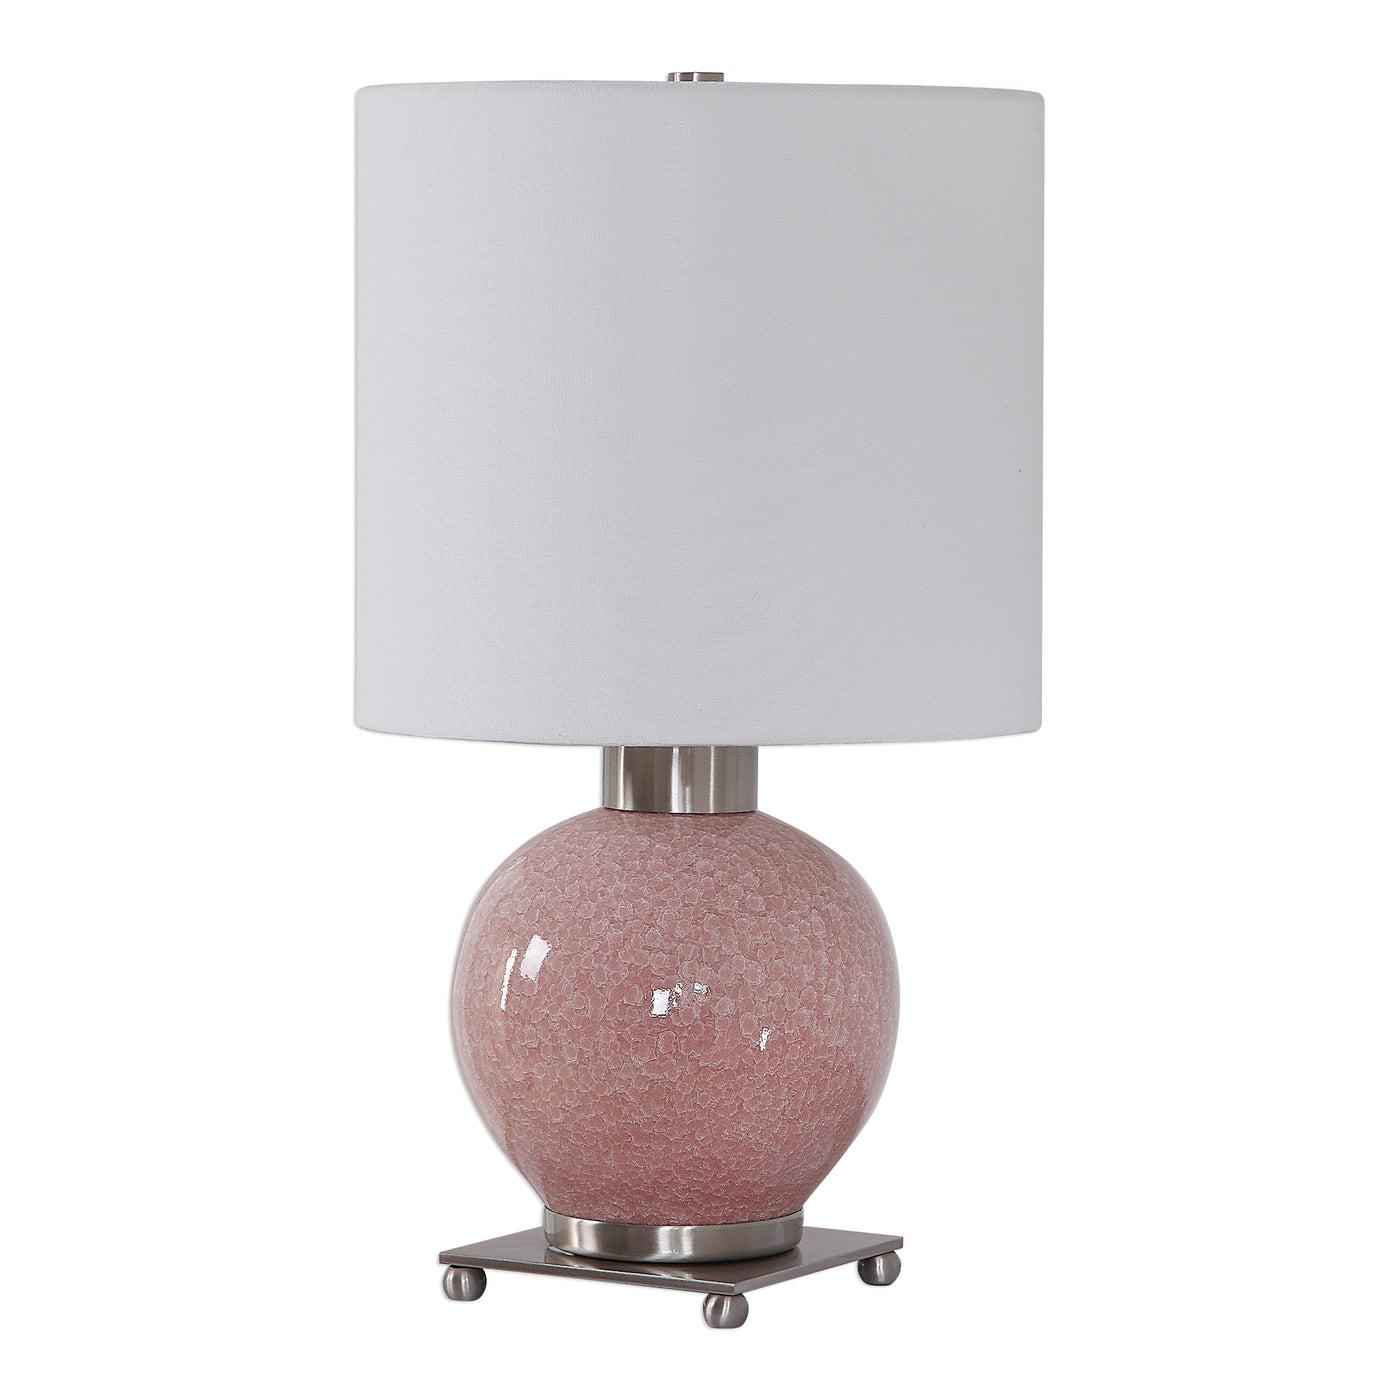 This Lamp Features A Classic Silhouette That Features A Pop Of On-trend Color. The Rounded Ceramic Base Is Finished In A M...